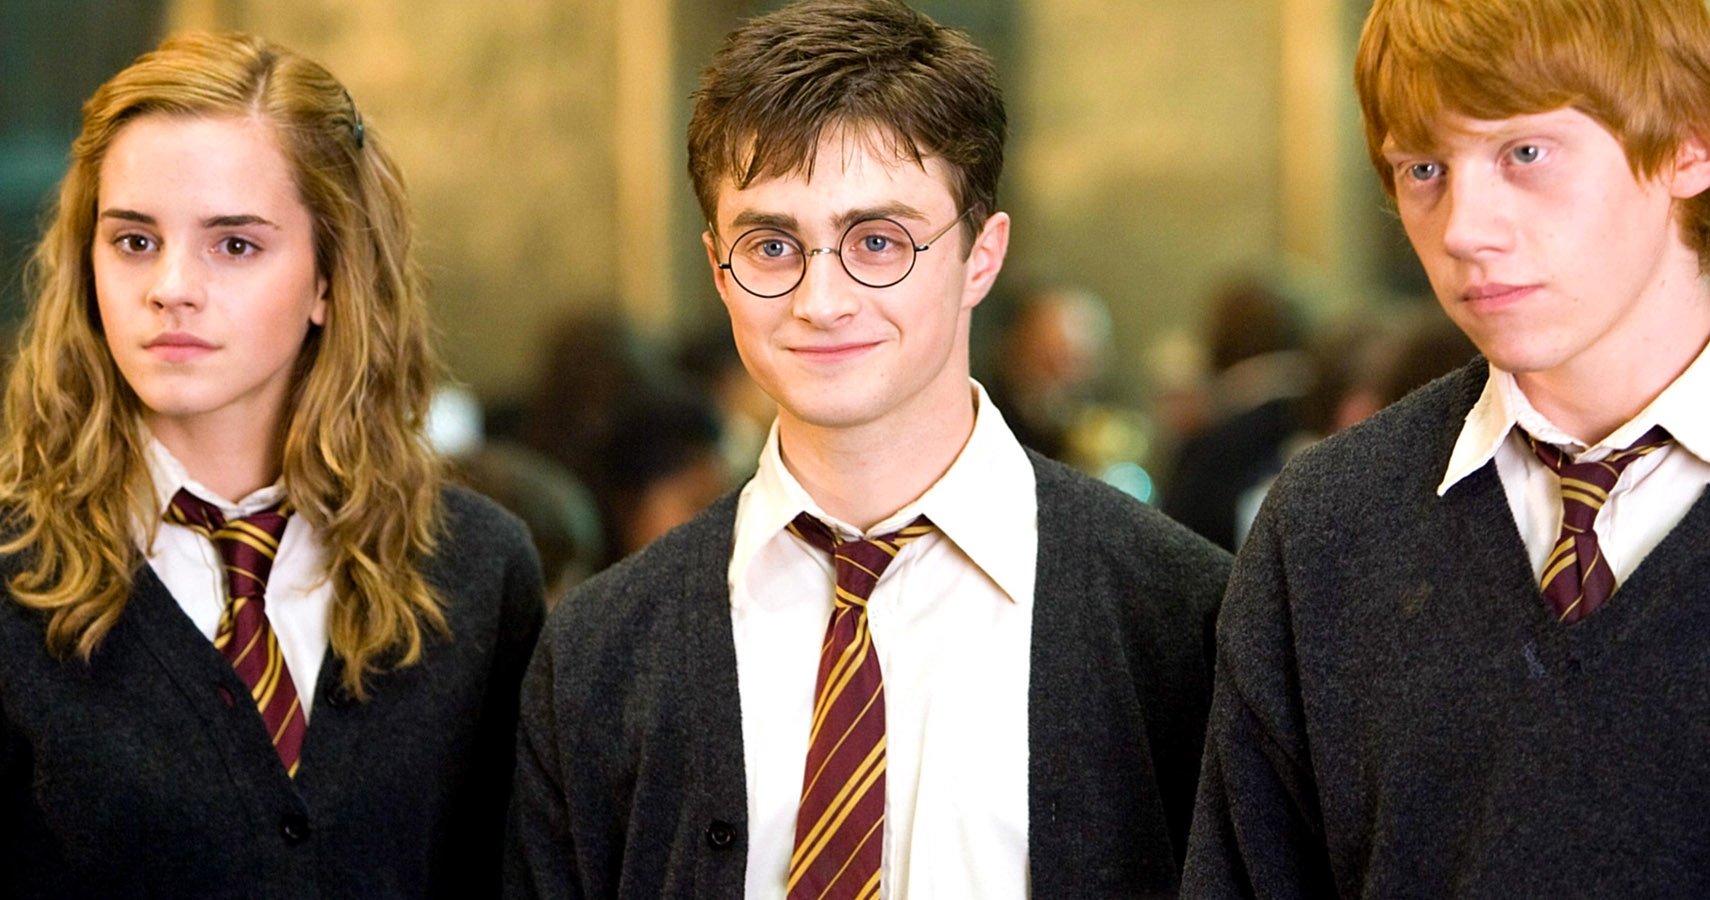 Who does Hermione end up marrying?